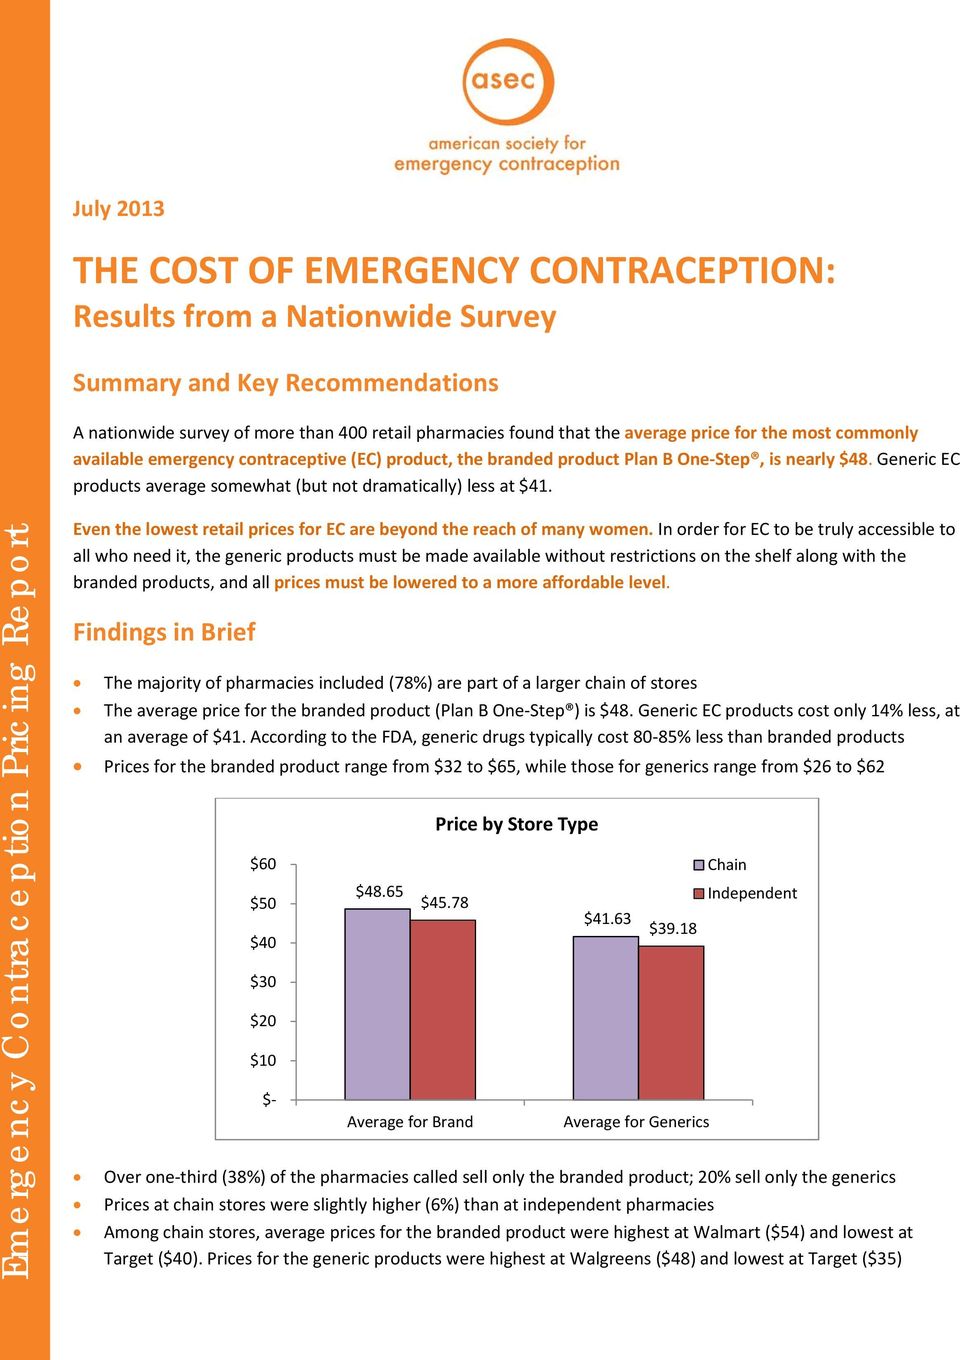 Emergency Contraception Pricing Report Even the lowest retail prices for EC are beyond the reach of many women.